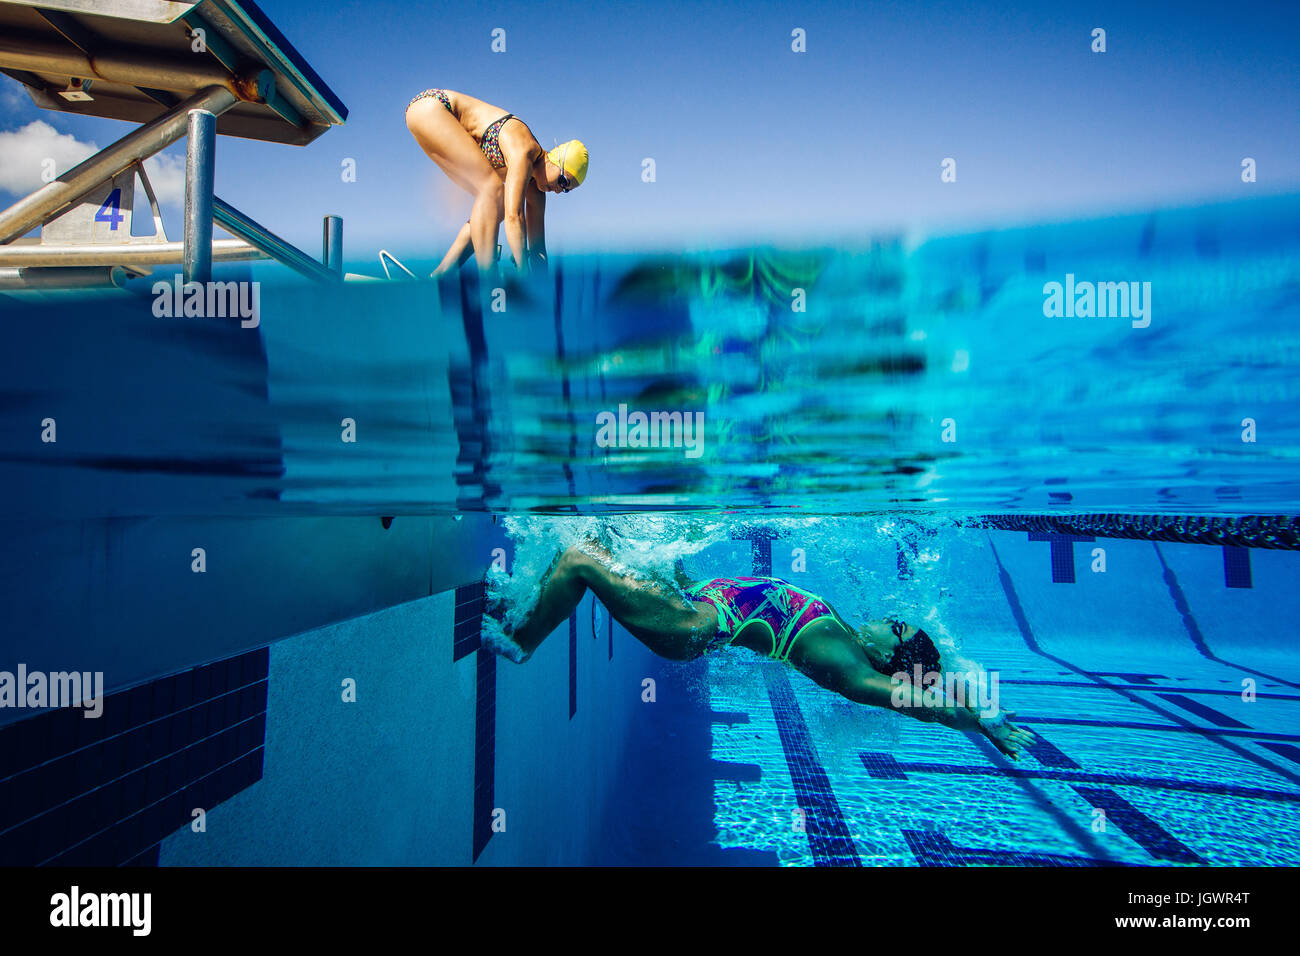 Swimmer on diving board and swimmer in pool Stock Photo